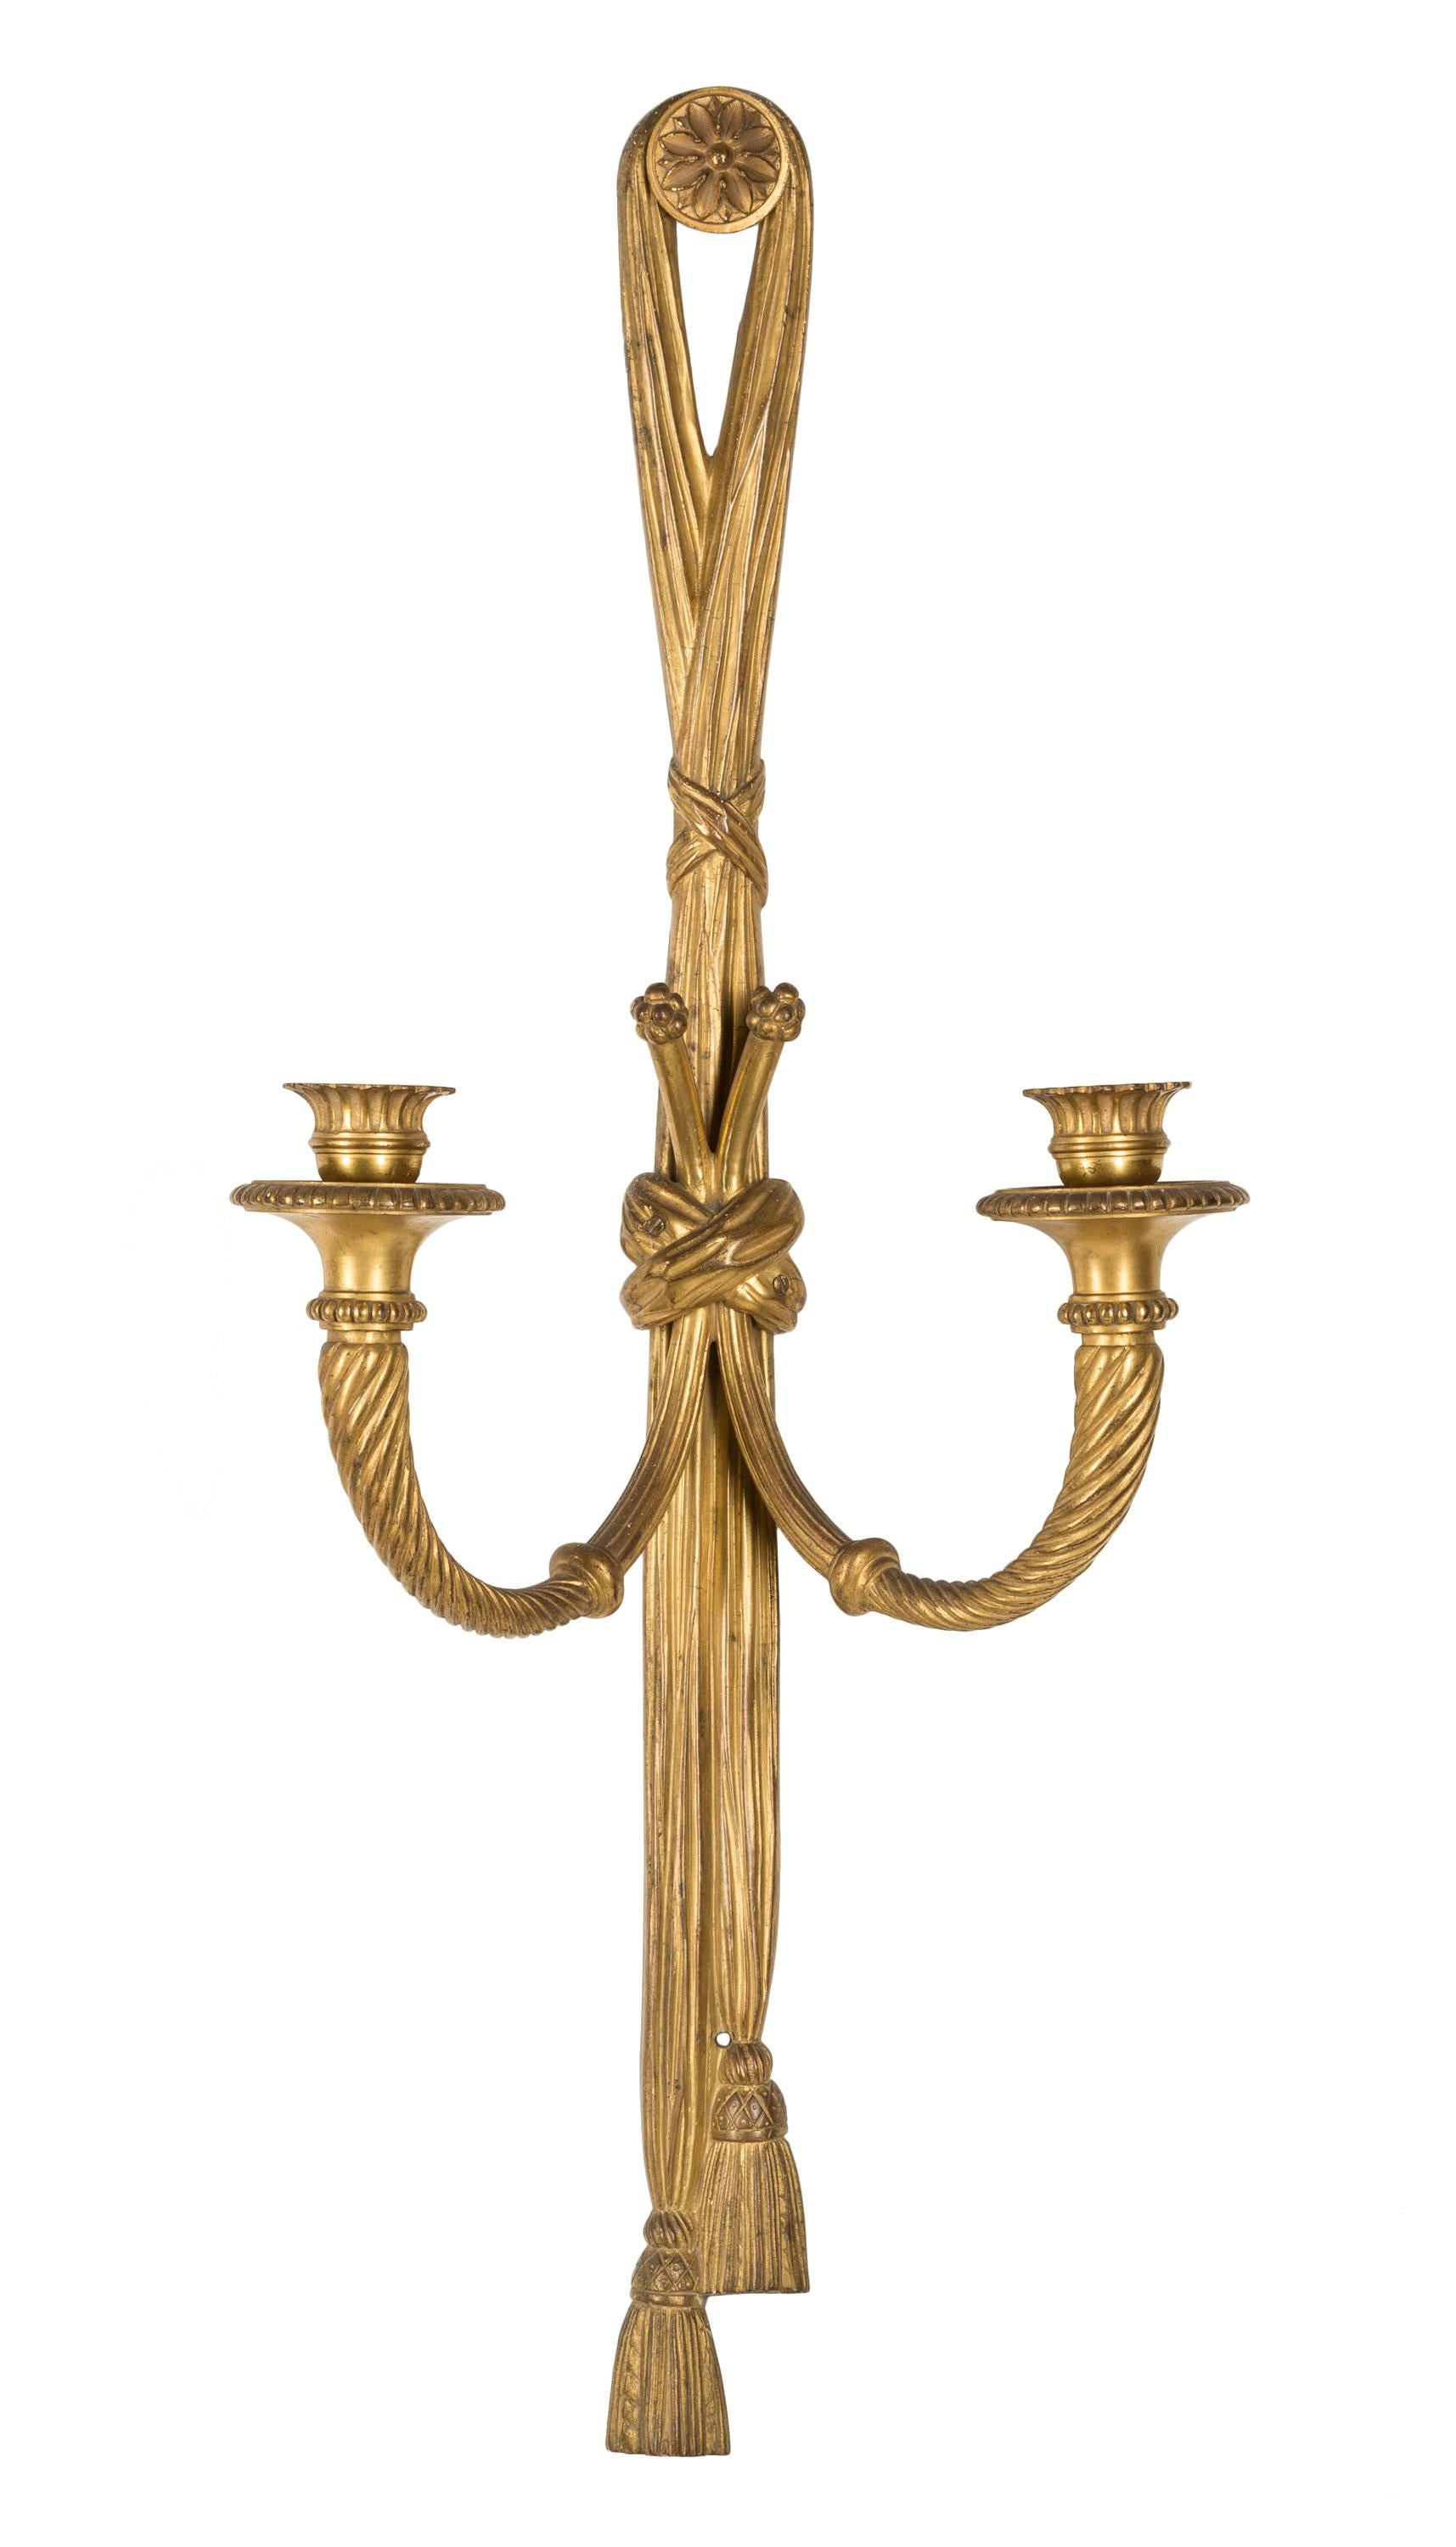 A matched pair of 19th century French gilt bronze wall sconces / appliqués in the form of knotted ribbons holding dual candle arms, ending in tassels, draped over buttons decorated with floral rosettes. These neoclassical elements, typical of the